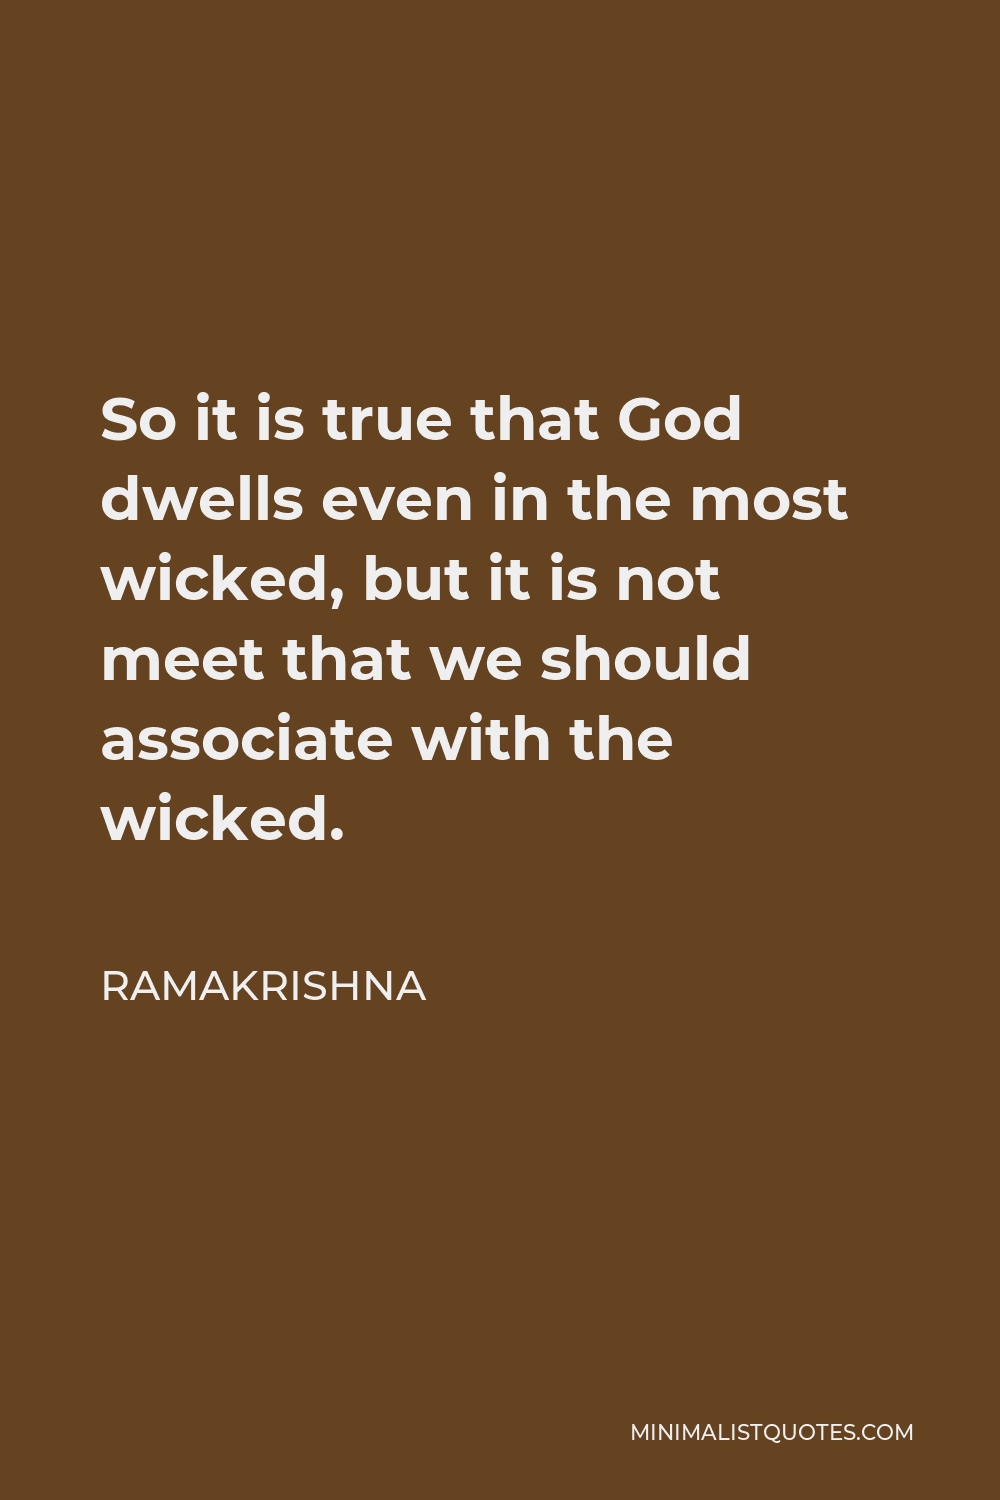 Ramakrishna Quote - So it is true that God dwells even in the most wicked, but it is not meet that we should associate with the wicked.